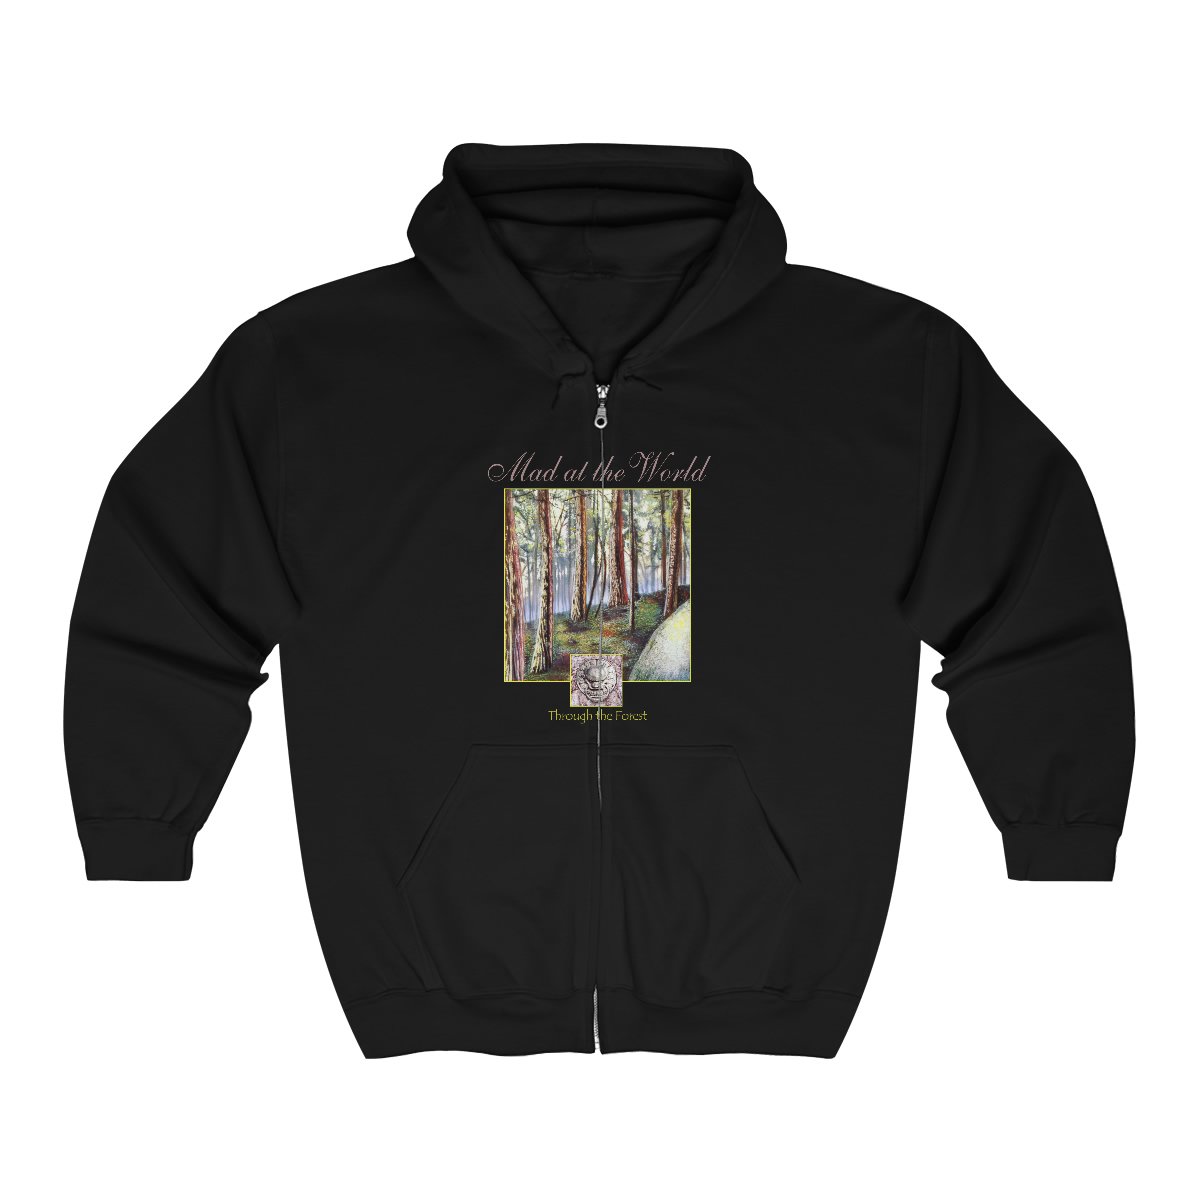 Mad at the World – Through the Forest Full Zip Hooded Sweatshirt